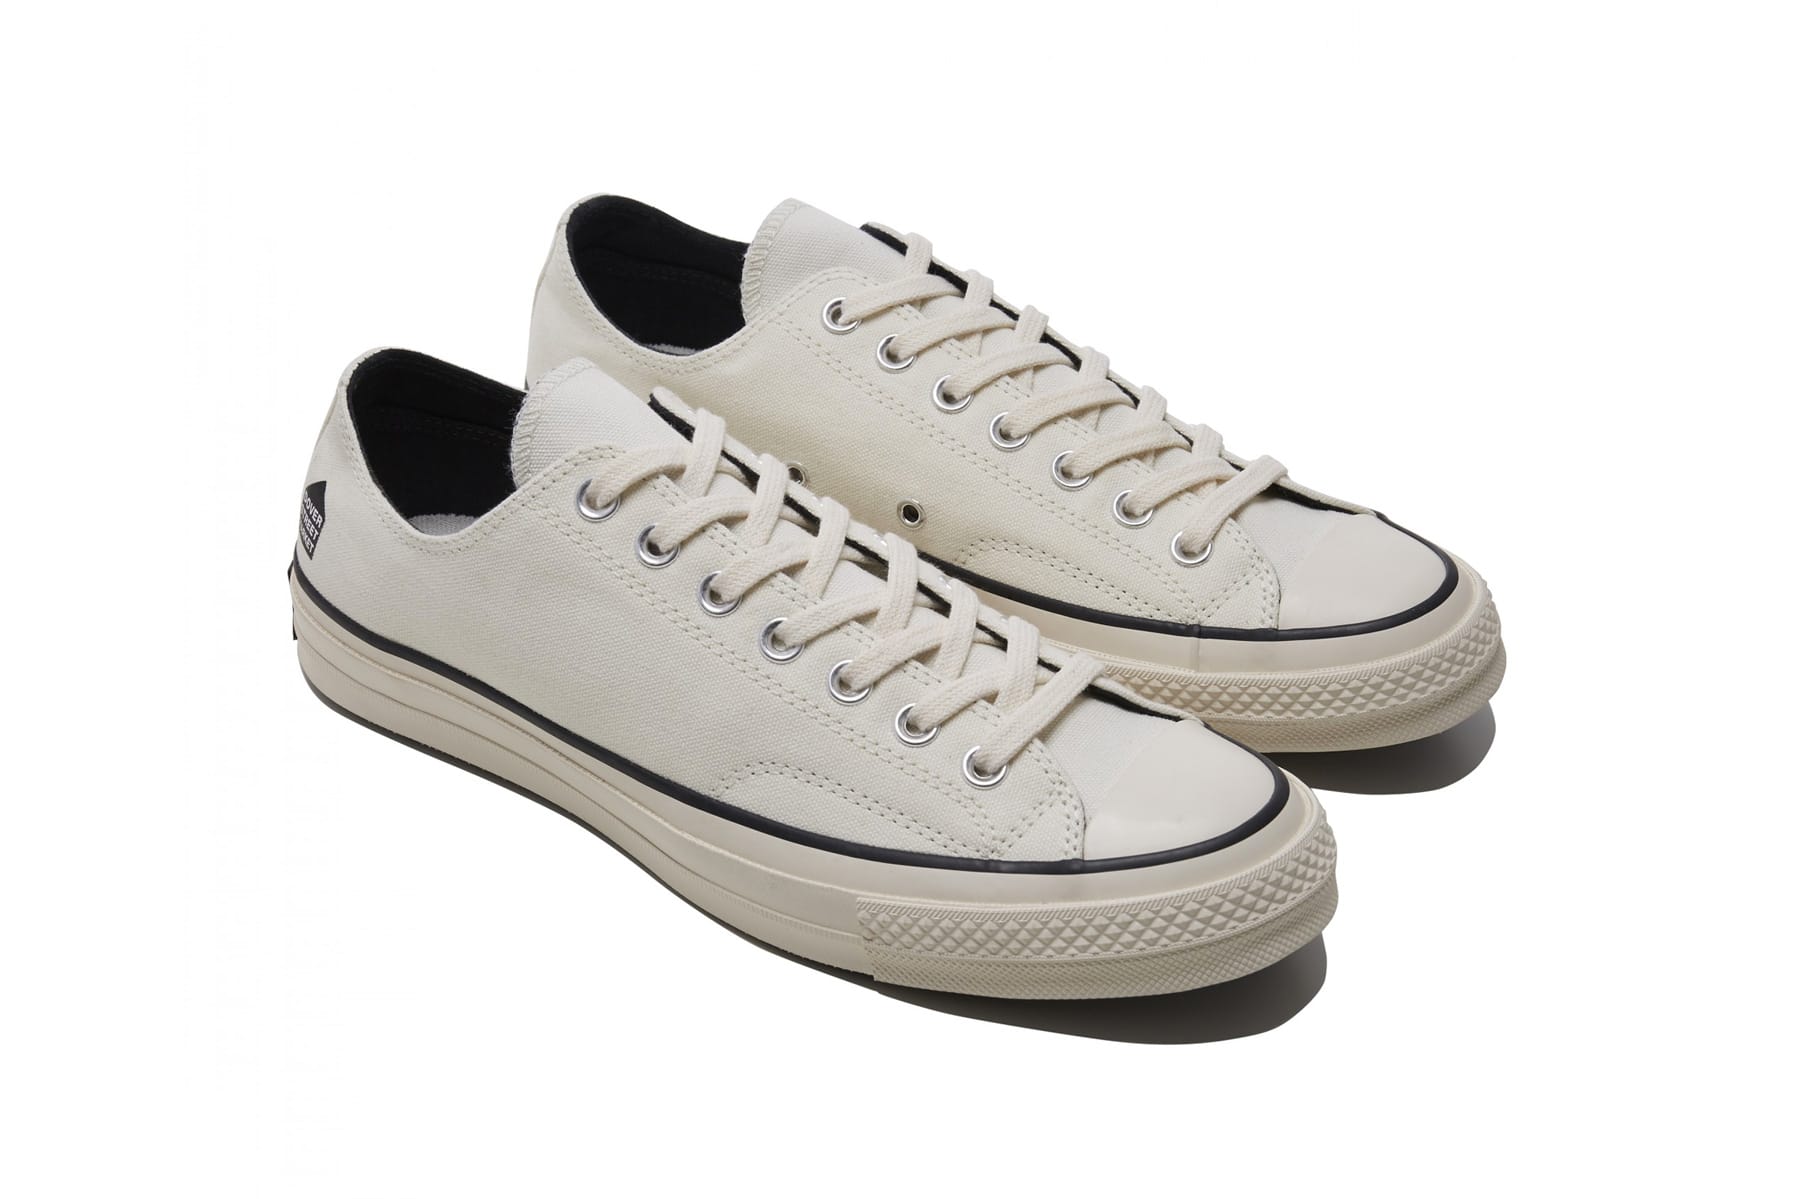 converse taylor all star 70